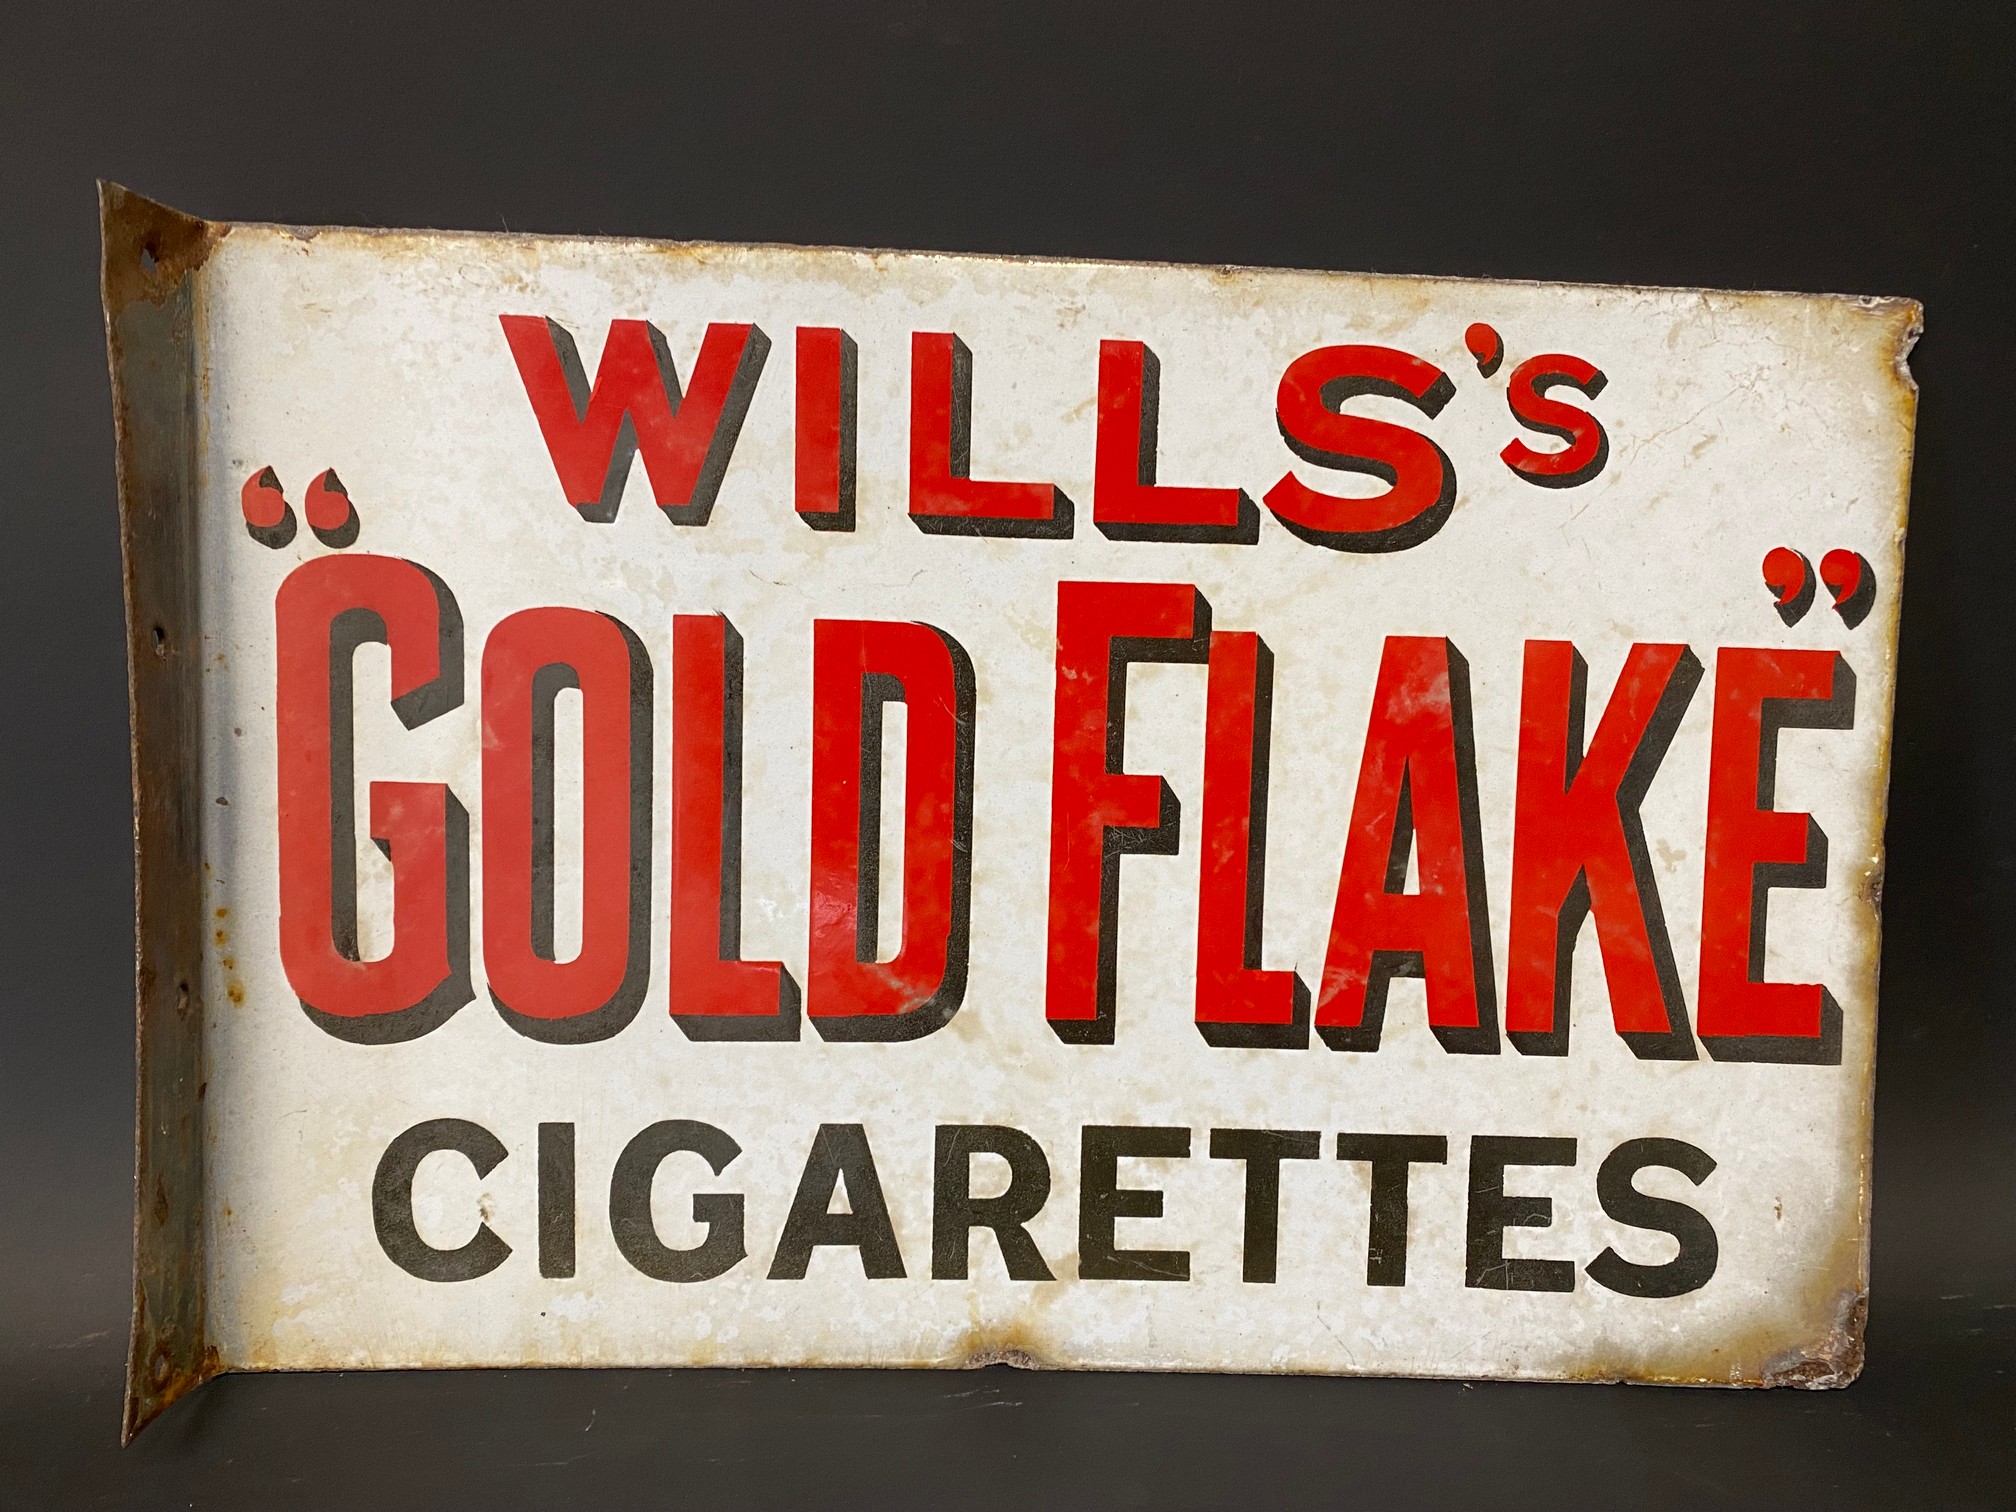 A Wills's Gold Flake Cigarettes double sided enamel sign with hanging flange, 18 x 12".